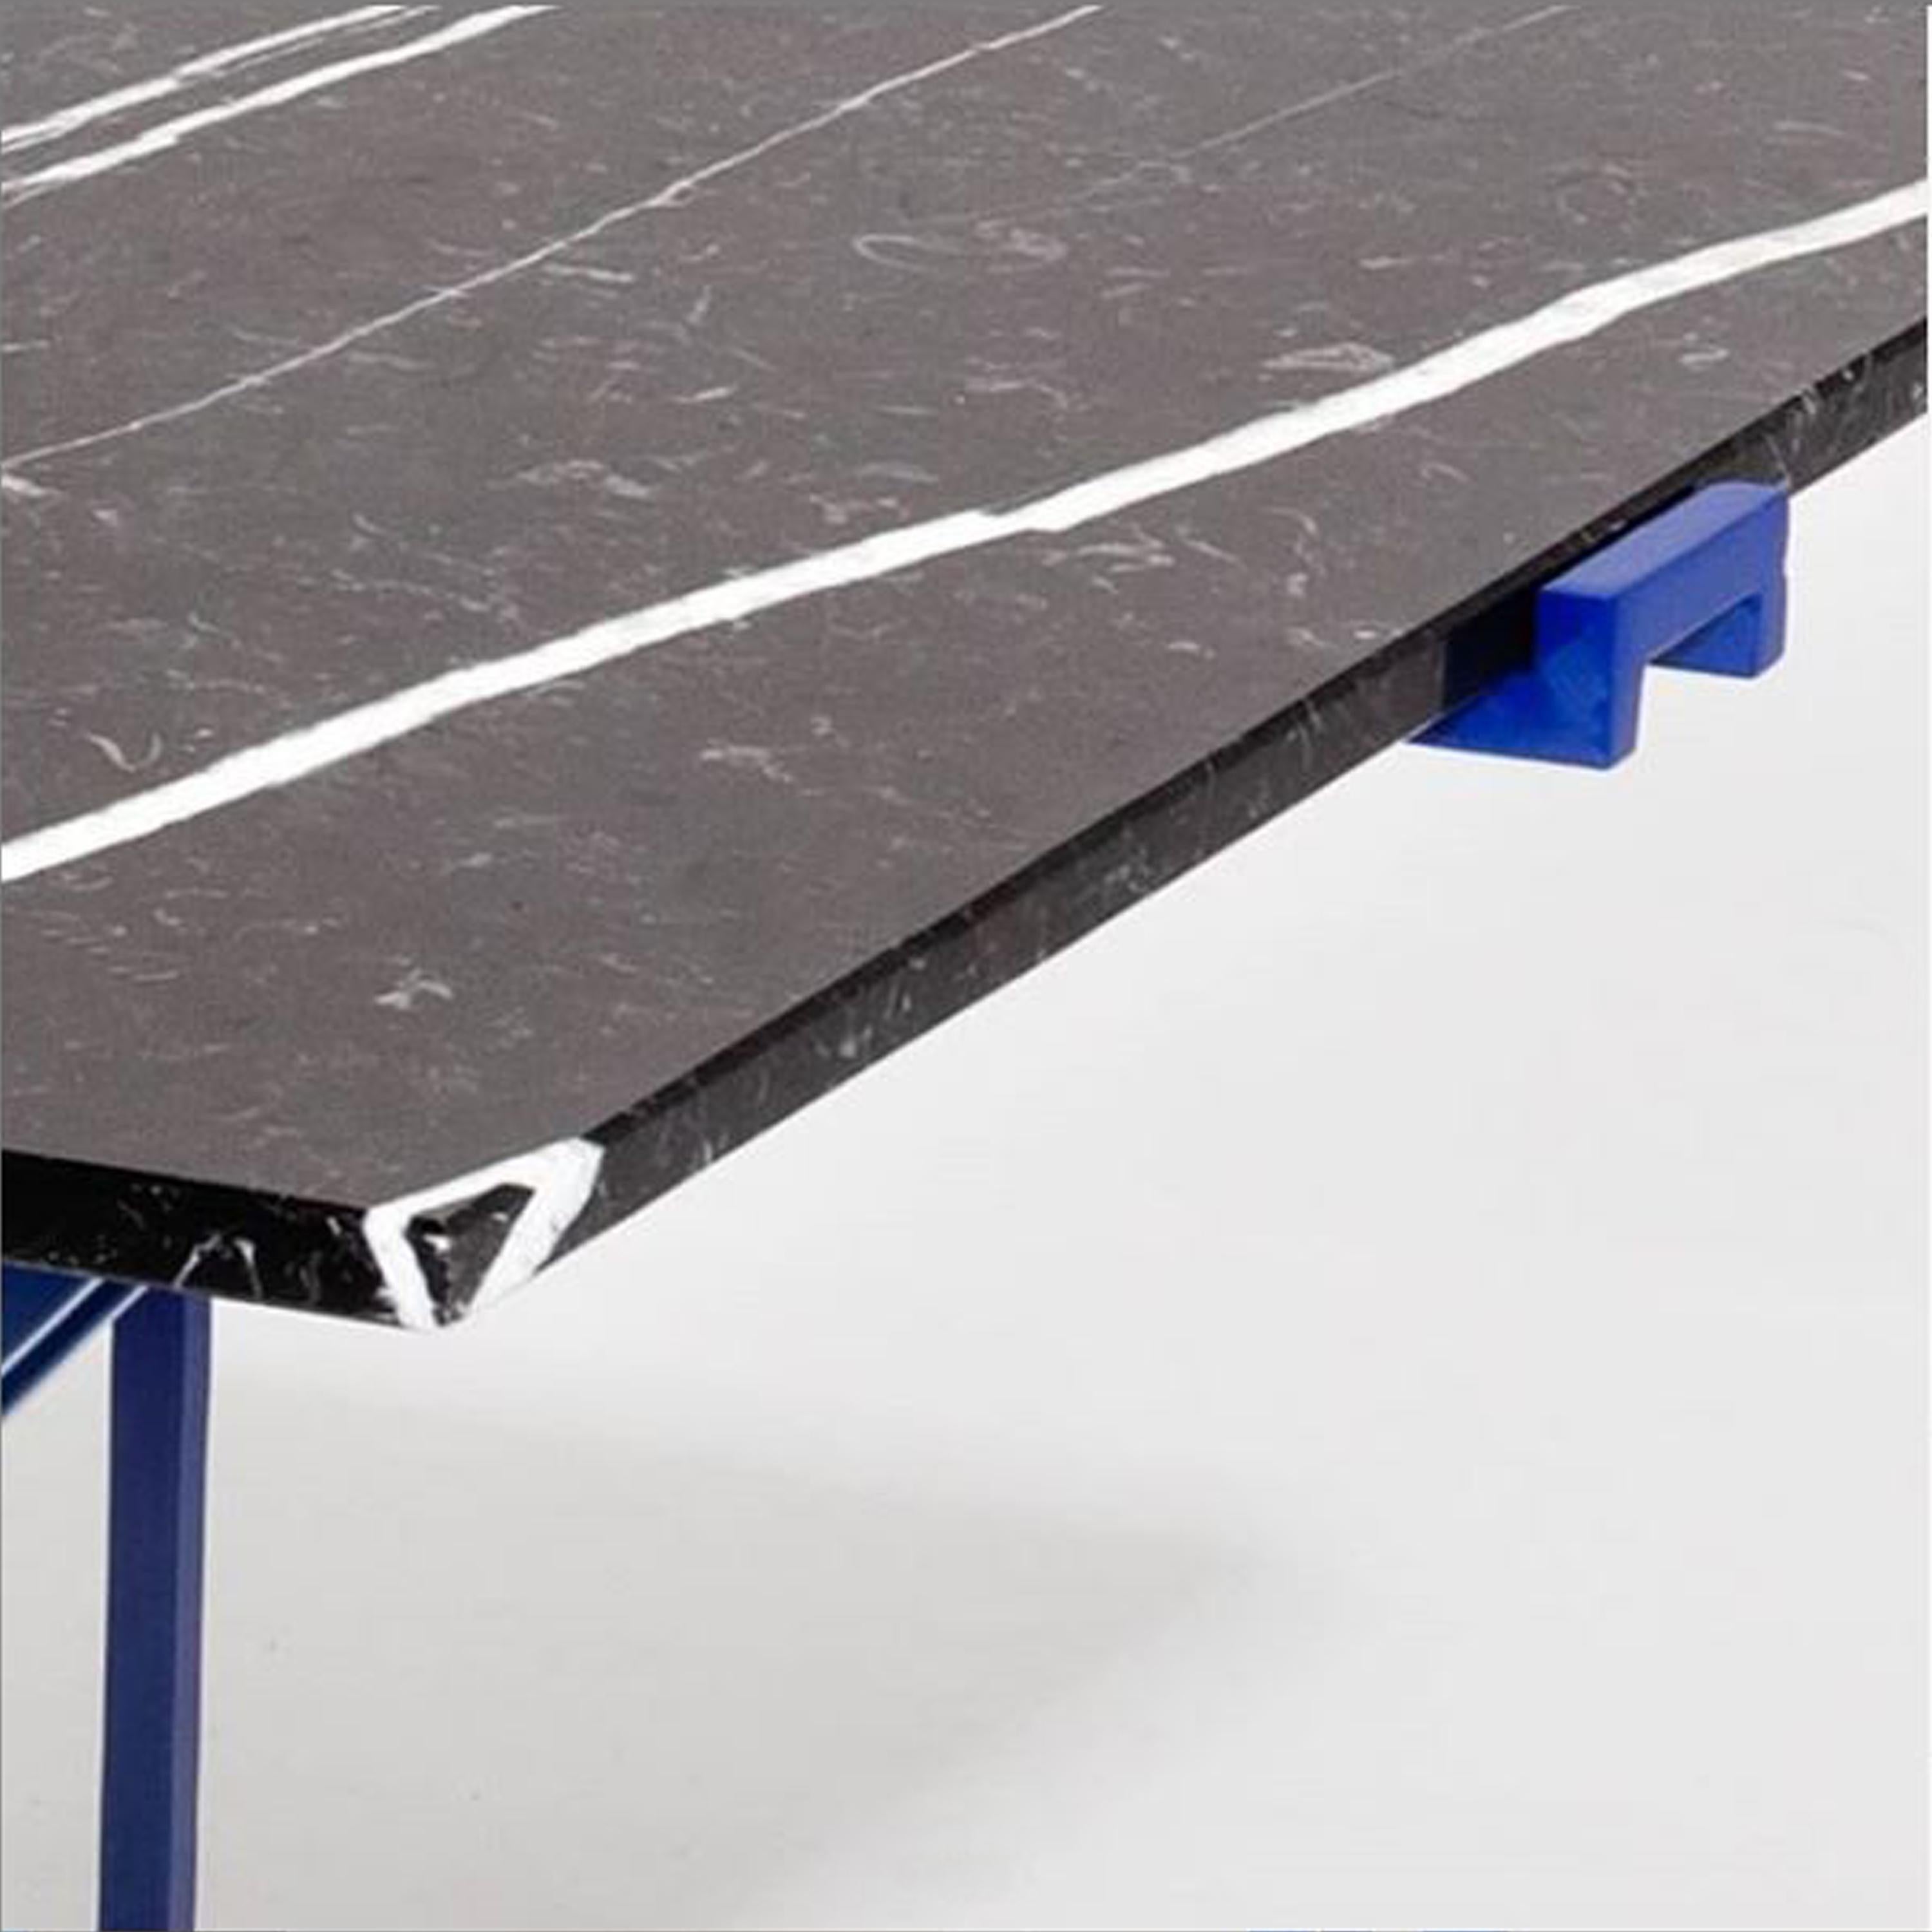 Lacquered Armombiedro Studio Rectangular Blue Black Metal Marble Dining Table, Spain 2019